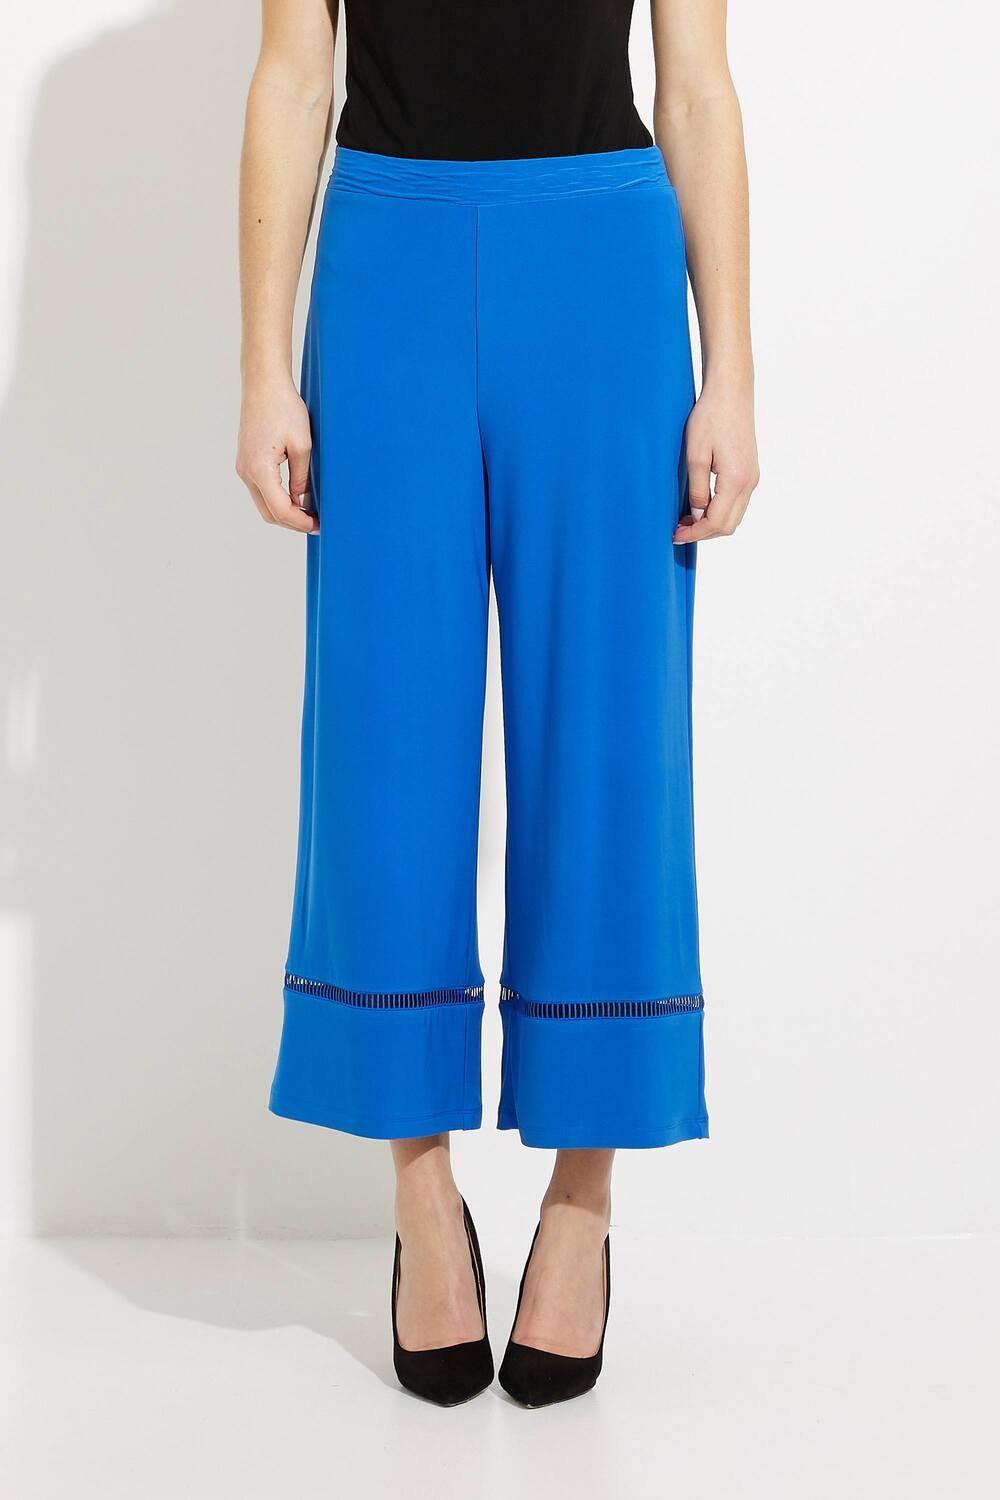 Cut-Out Wide Leg Pants Style 231152. Oasis